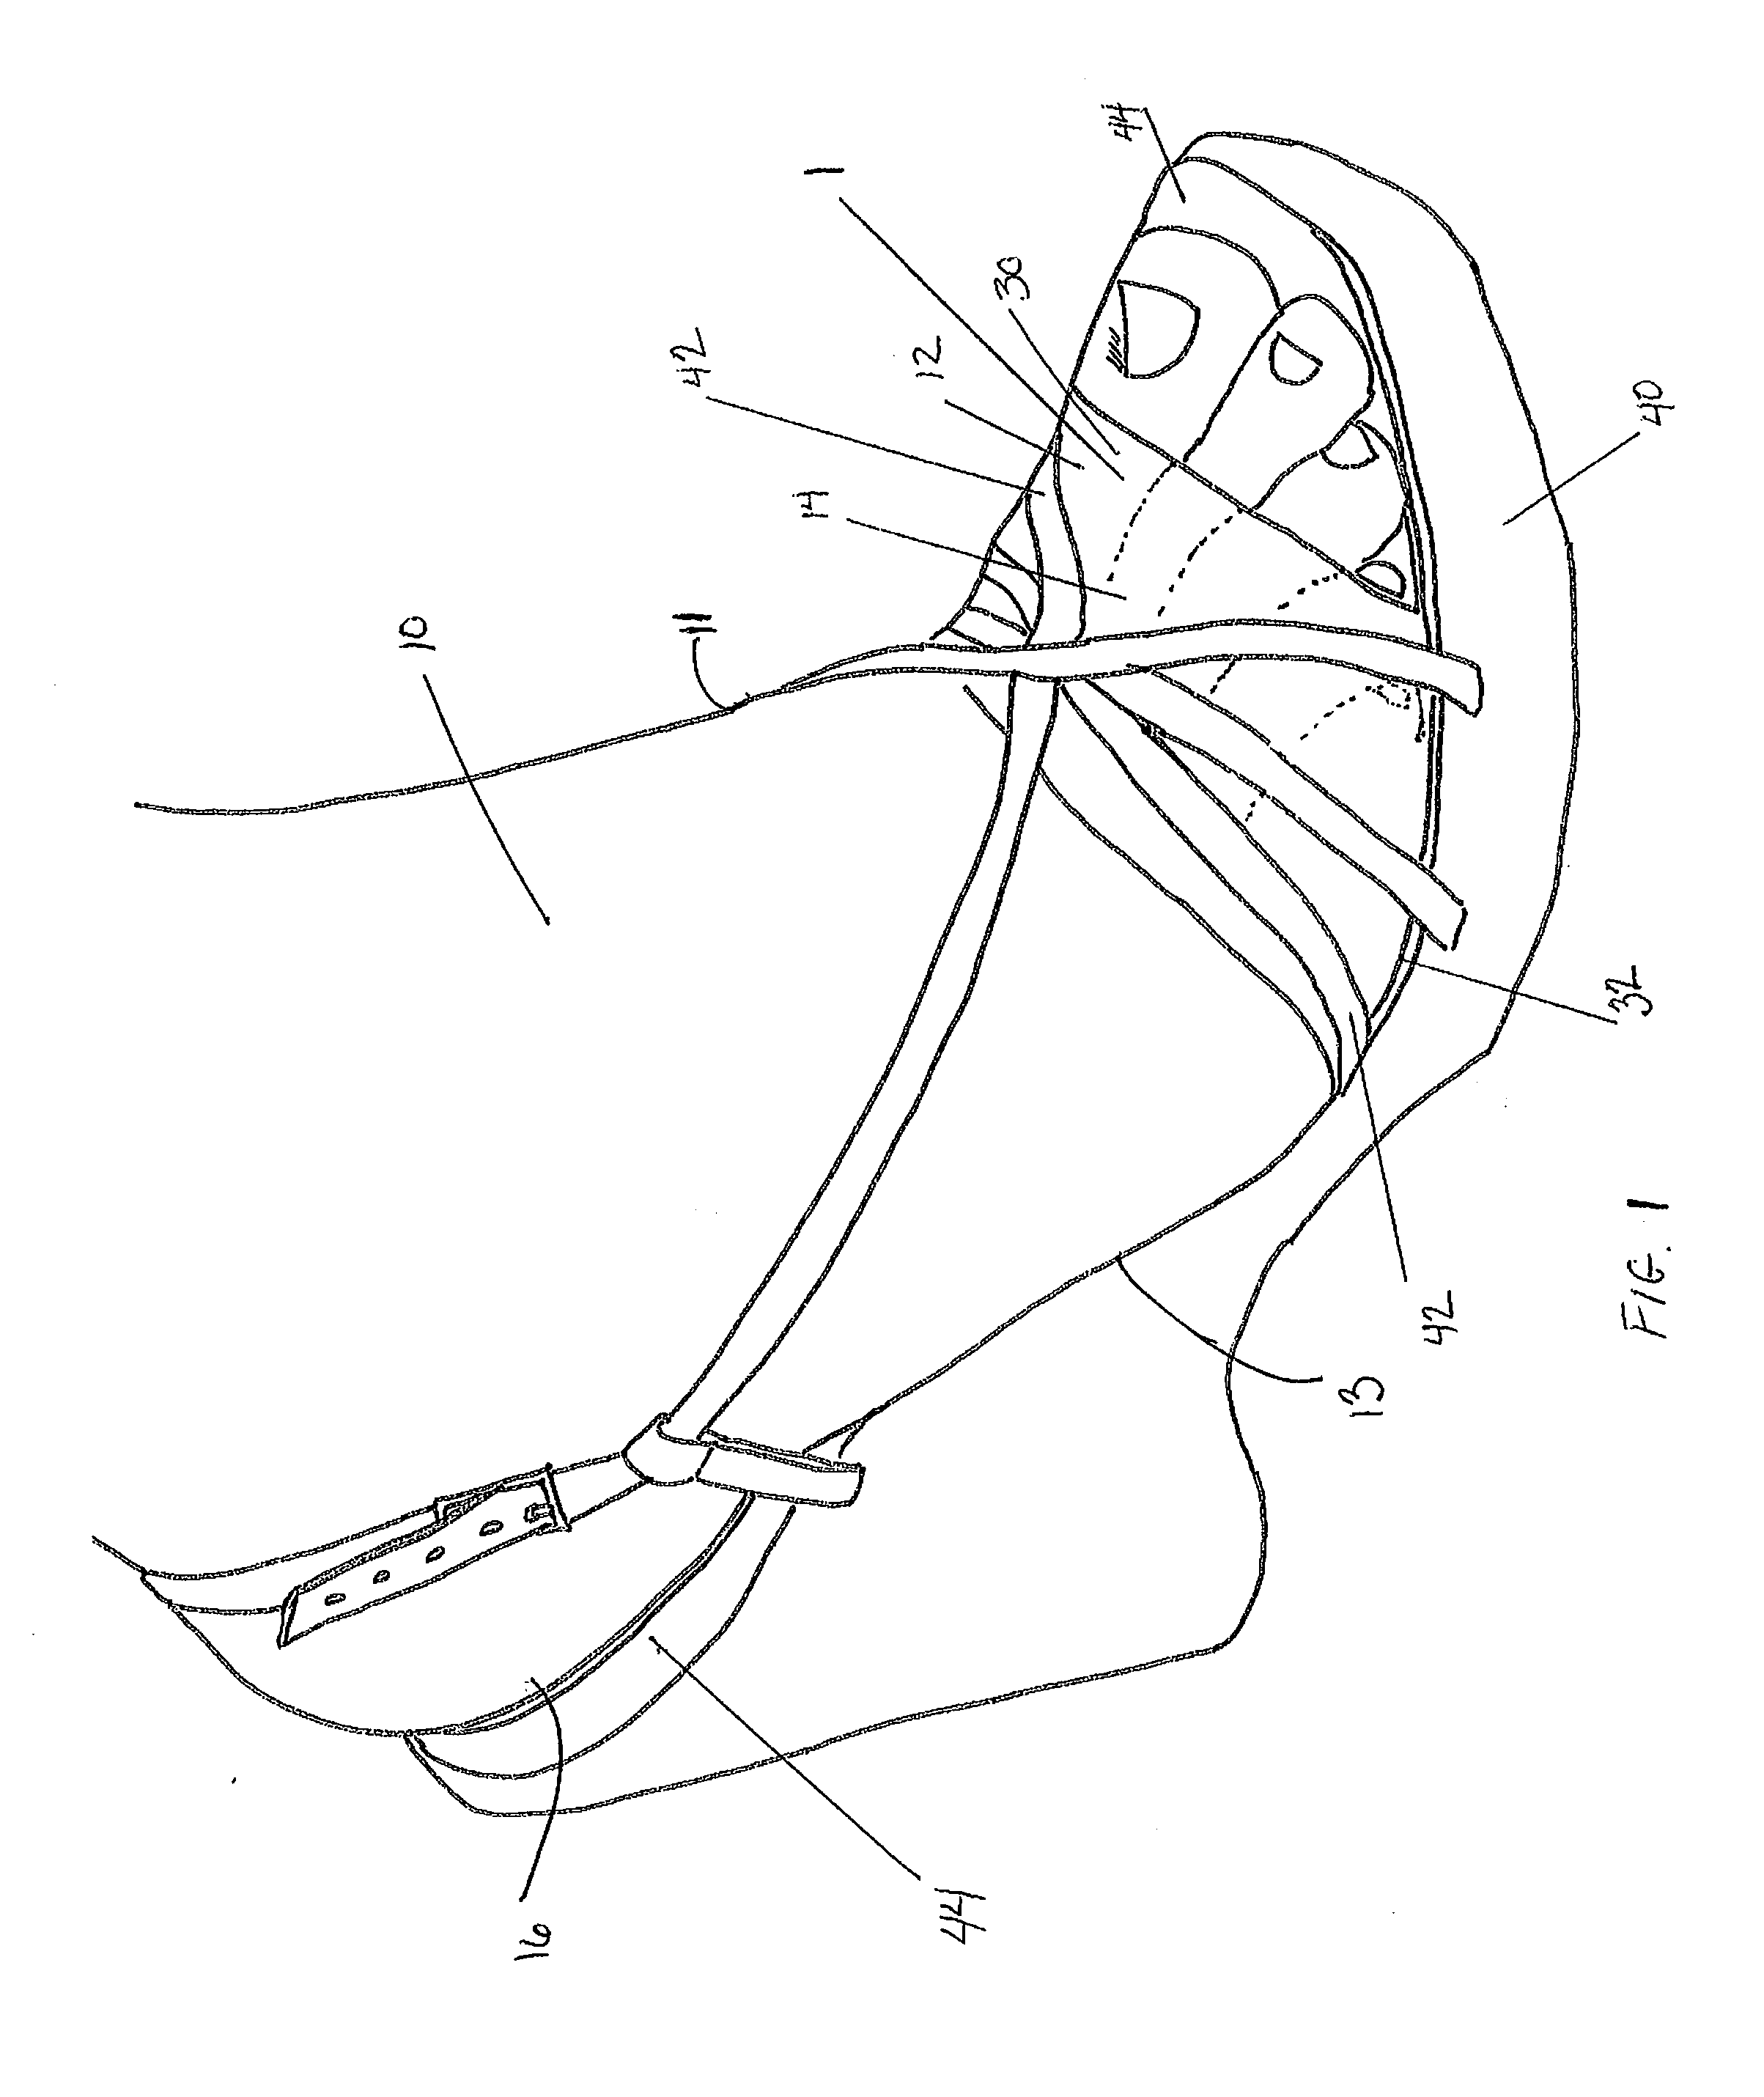 Foot Protection Device for Insertion into a Sandal to Minimize Pressure and Irritations on the Top and Front Portions of the Foot